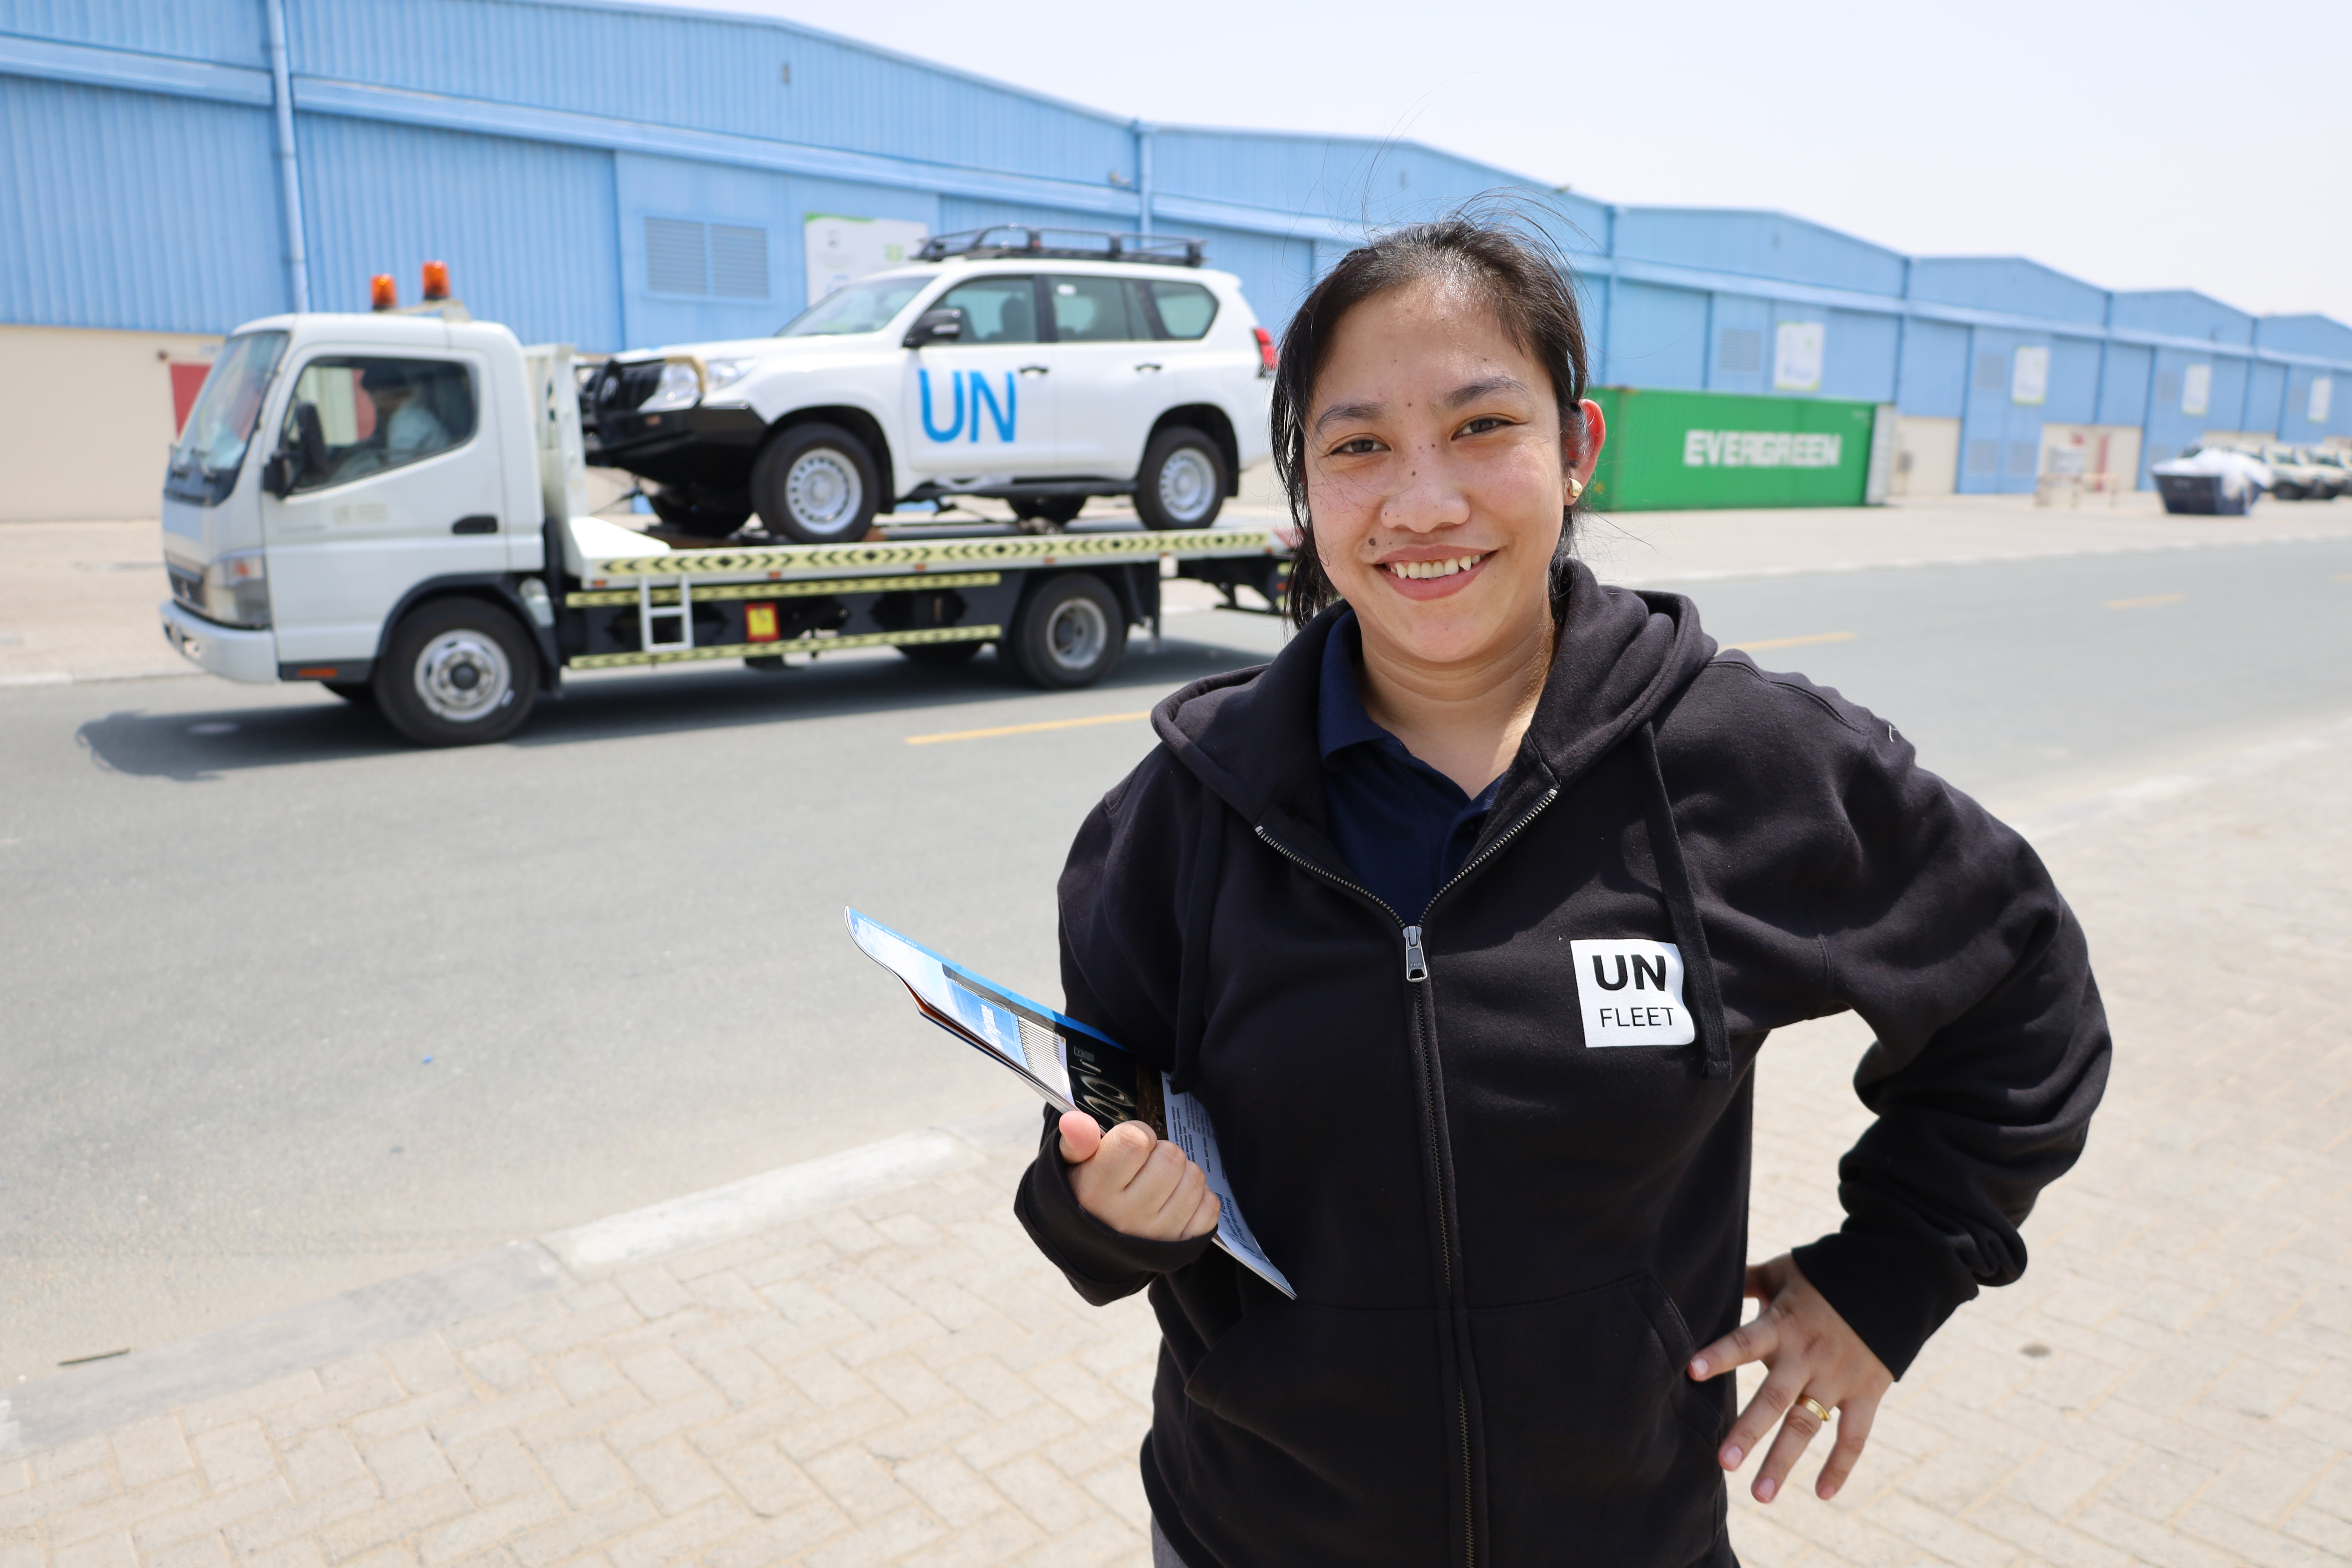 A woman stands in front of a tow truck carrying a white vehicle that reads UN in blue.